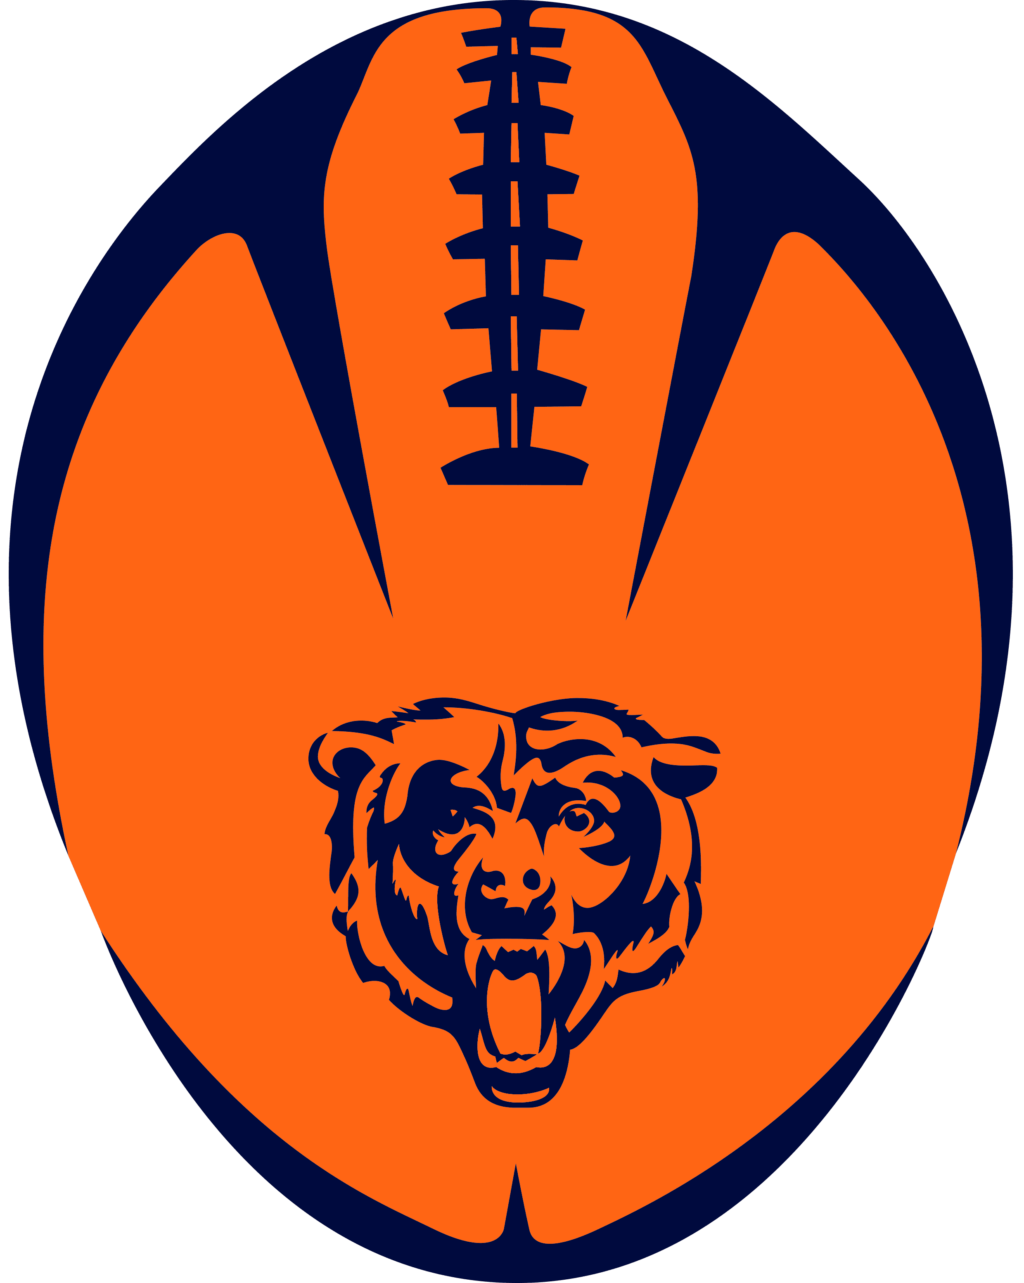 chicago bears 08 12 Styles NFL Chicago Bears svg. Chicago Bears svg, eps, dxf, png. Chicago Bears Vector Logo Clipart, Chicago Bears Clipart svg, Files For Silhouette, Chicago Bears Images Bundle, Chicago Bears Cricut files, Instant Download.